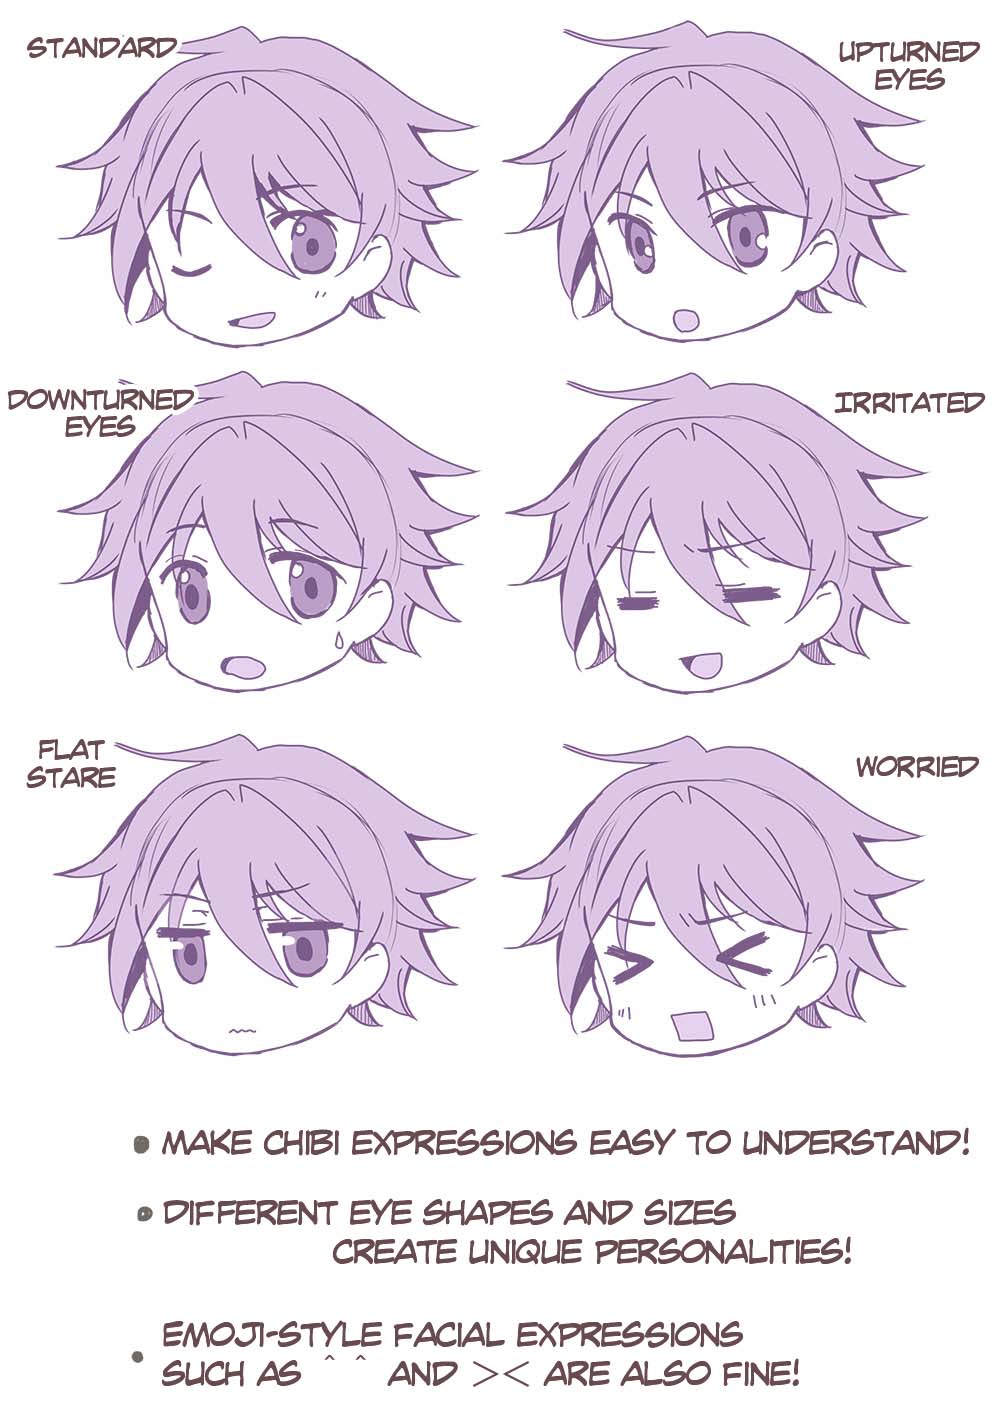 Easy Steps to Creating Chibi Characters